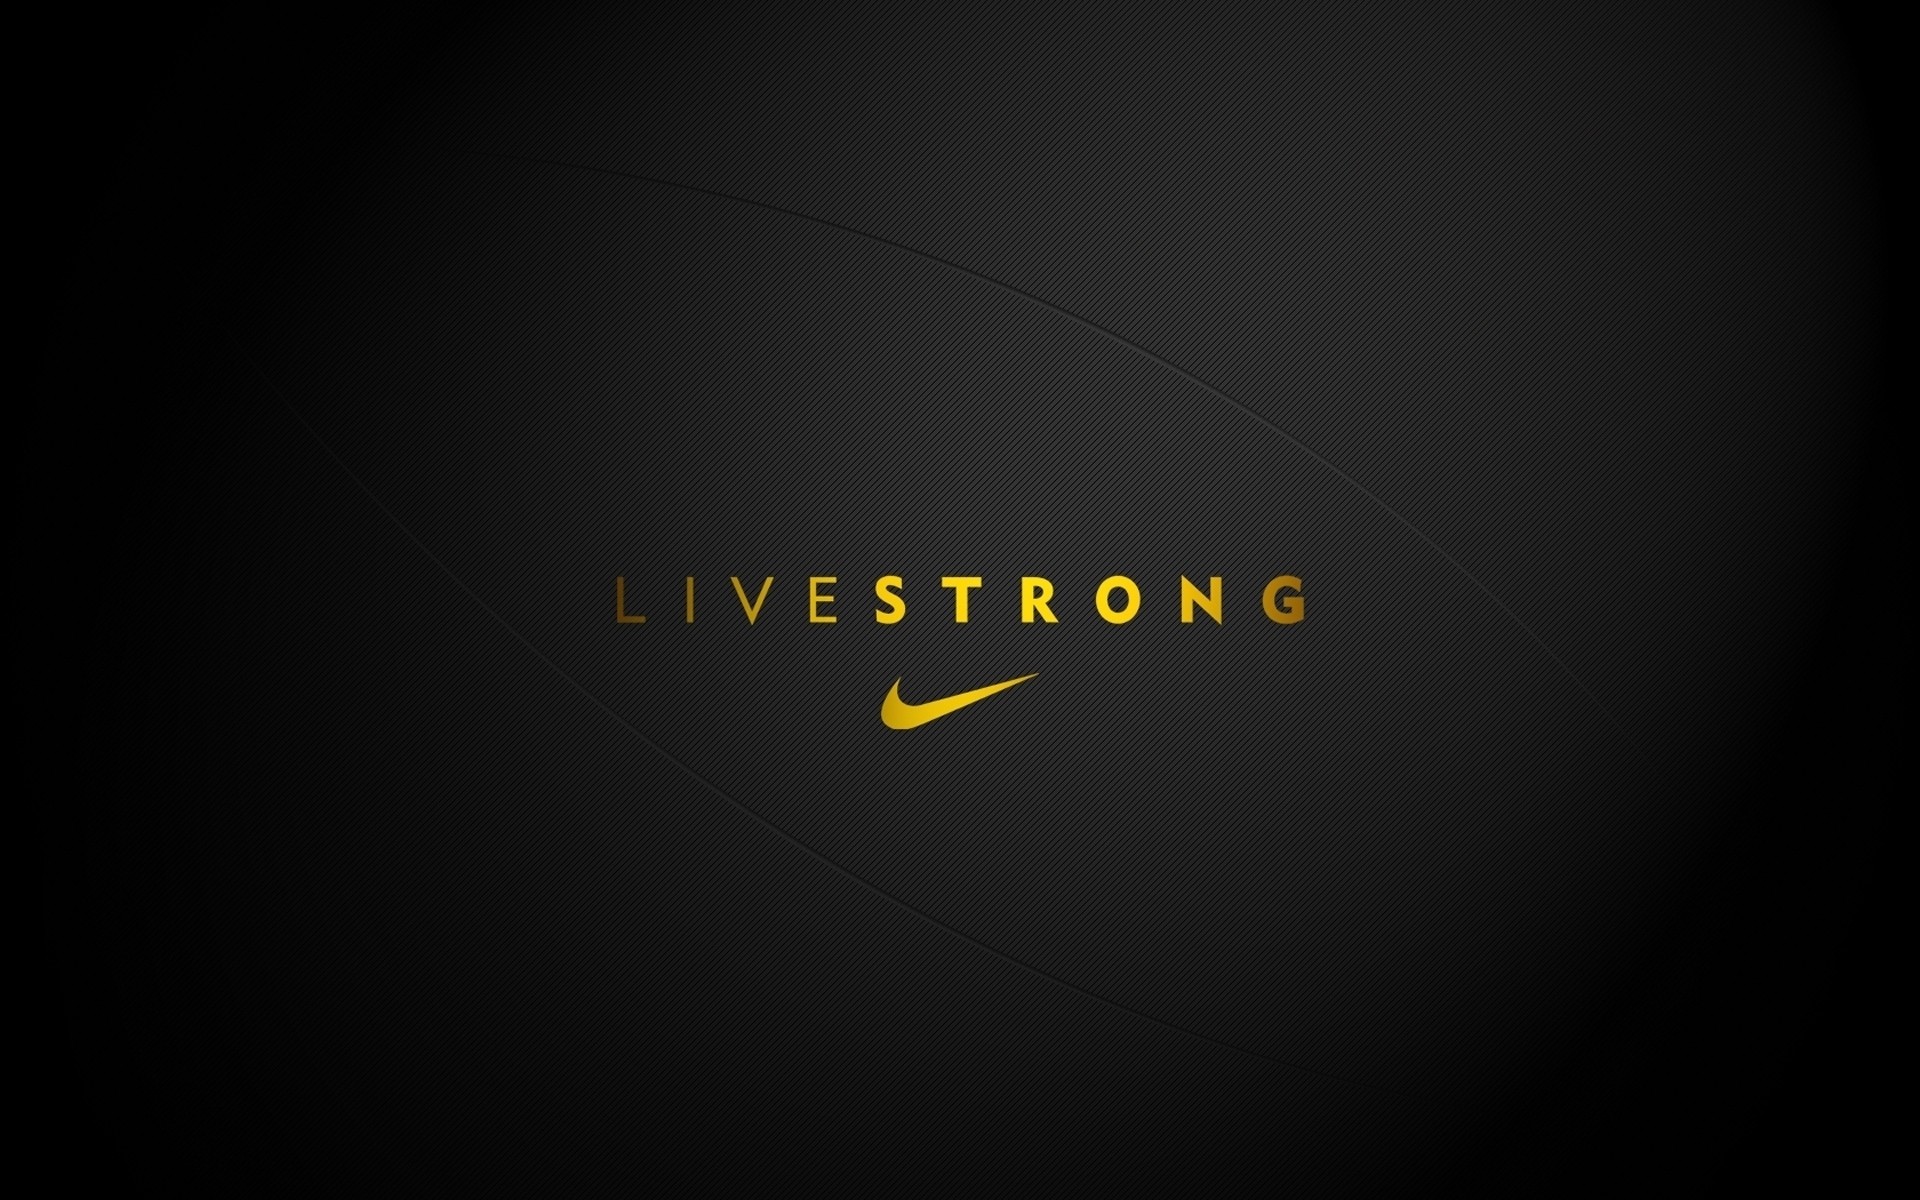 Live Strong Nike - Phone wallpapers